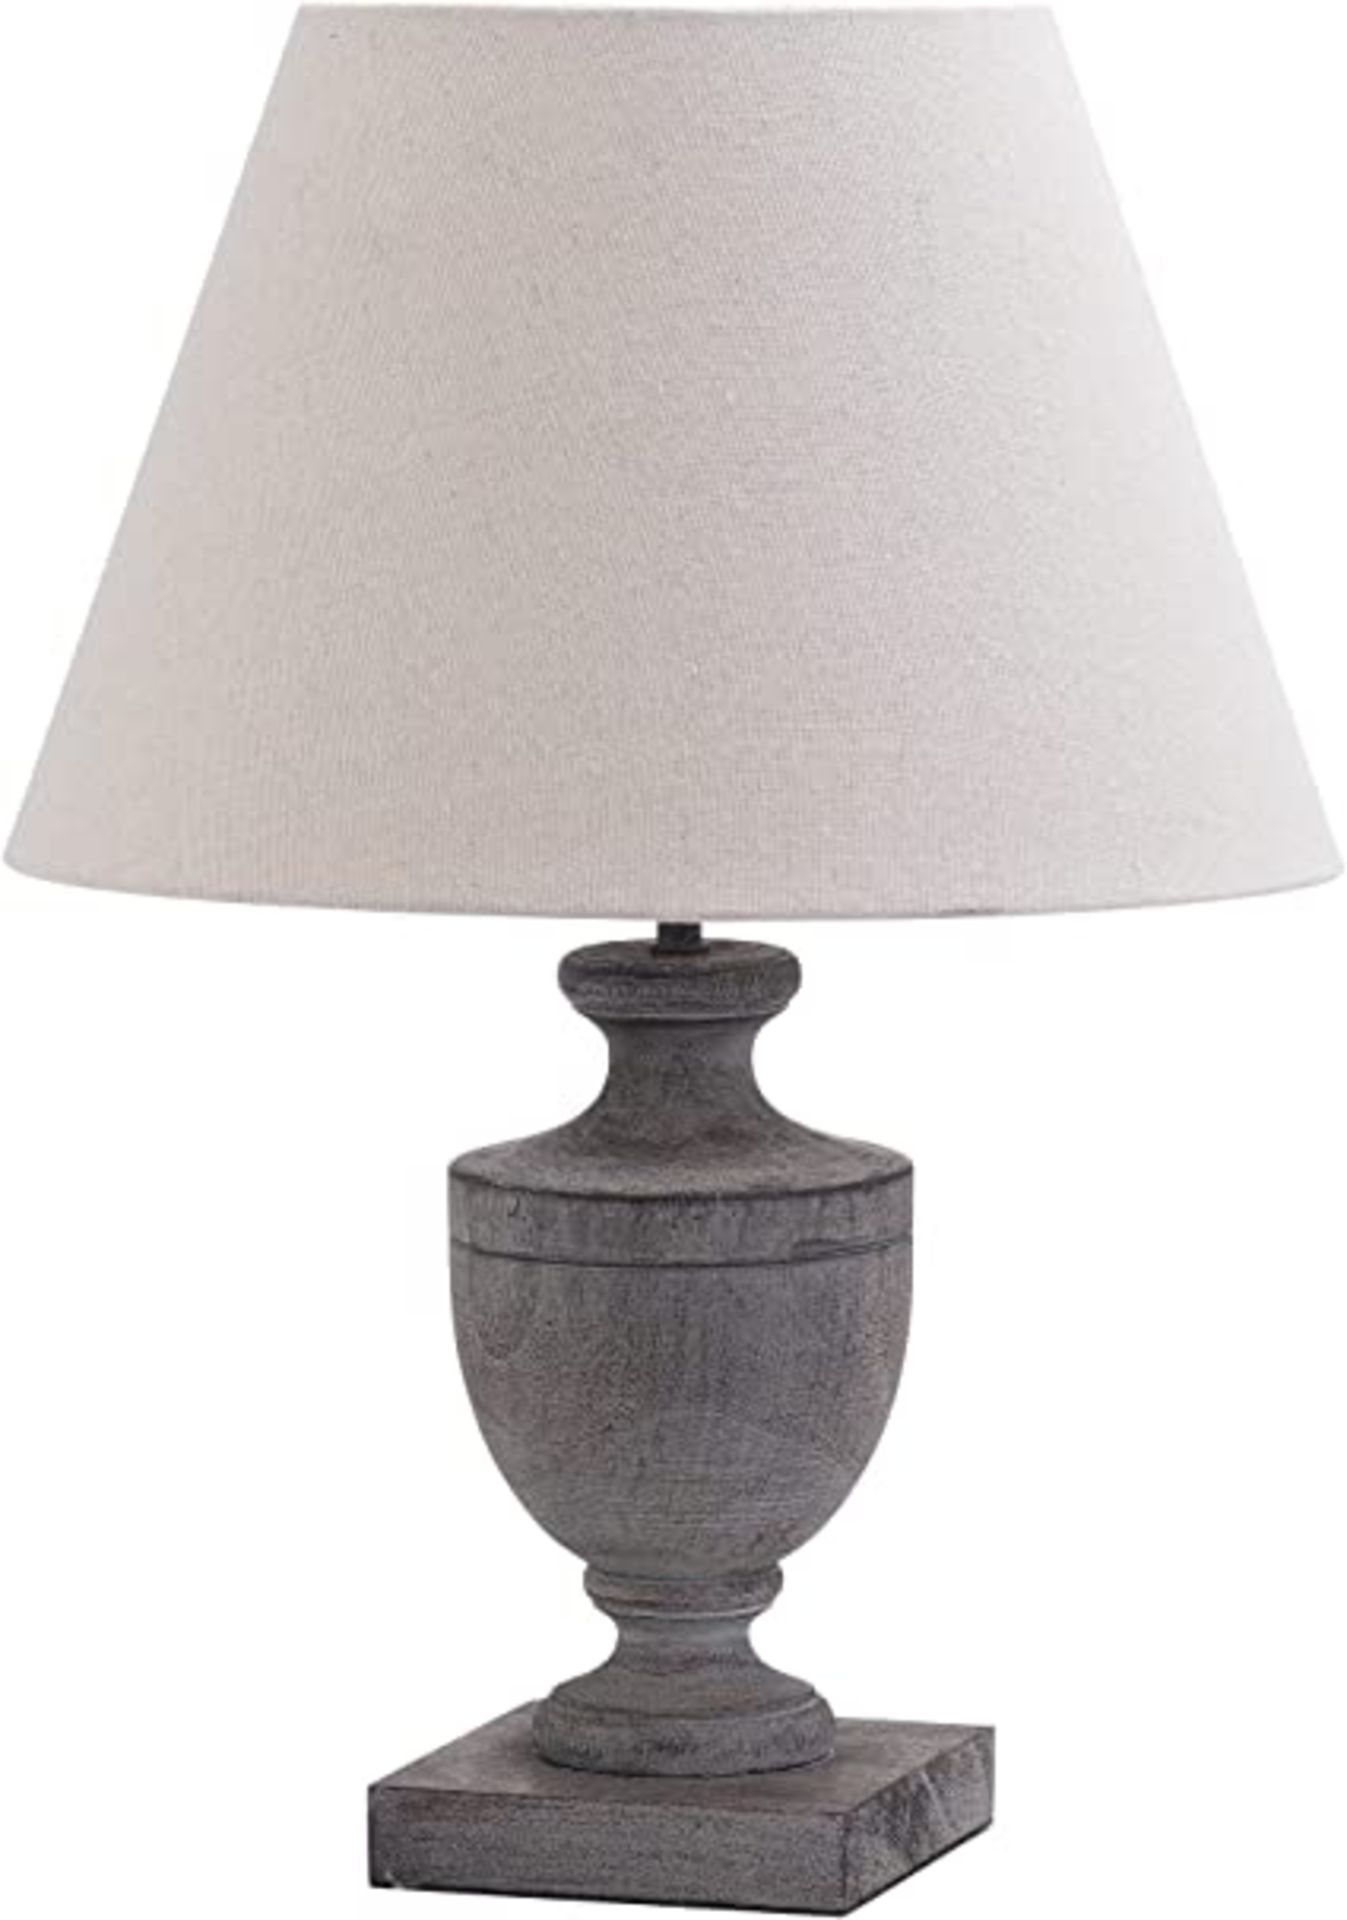 Hill 1975 Incia Urn Wooden Table Lamp, Mixed, 13 x 13 x 33cm